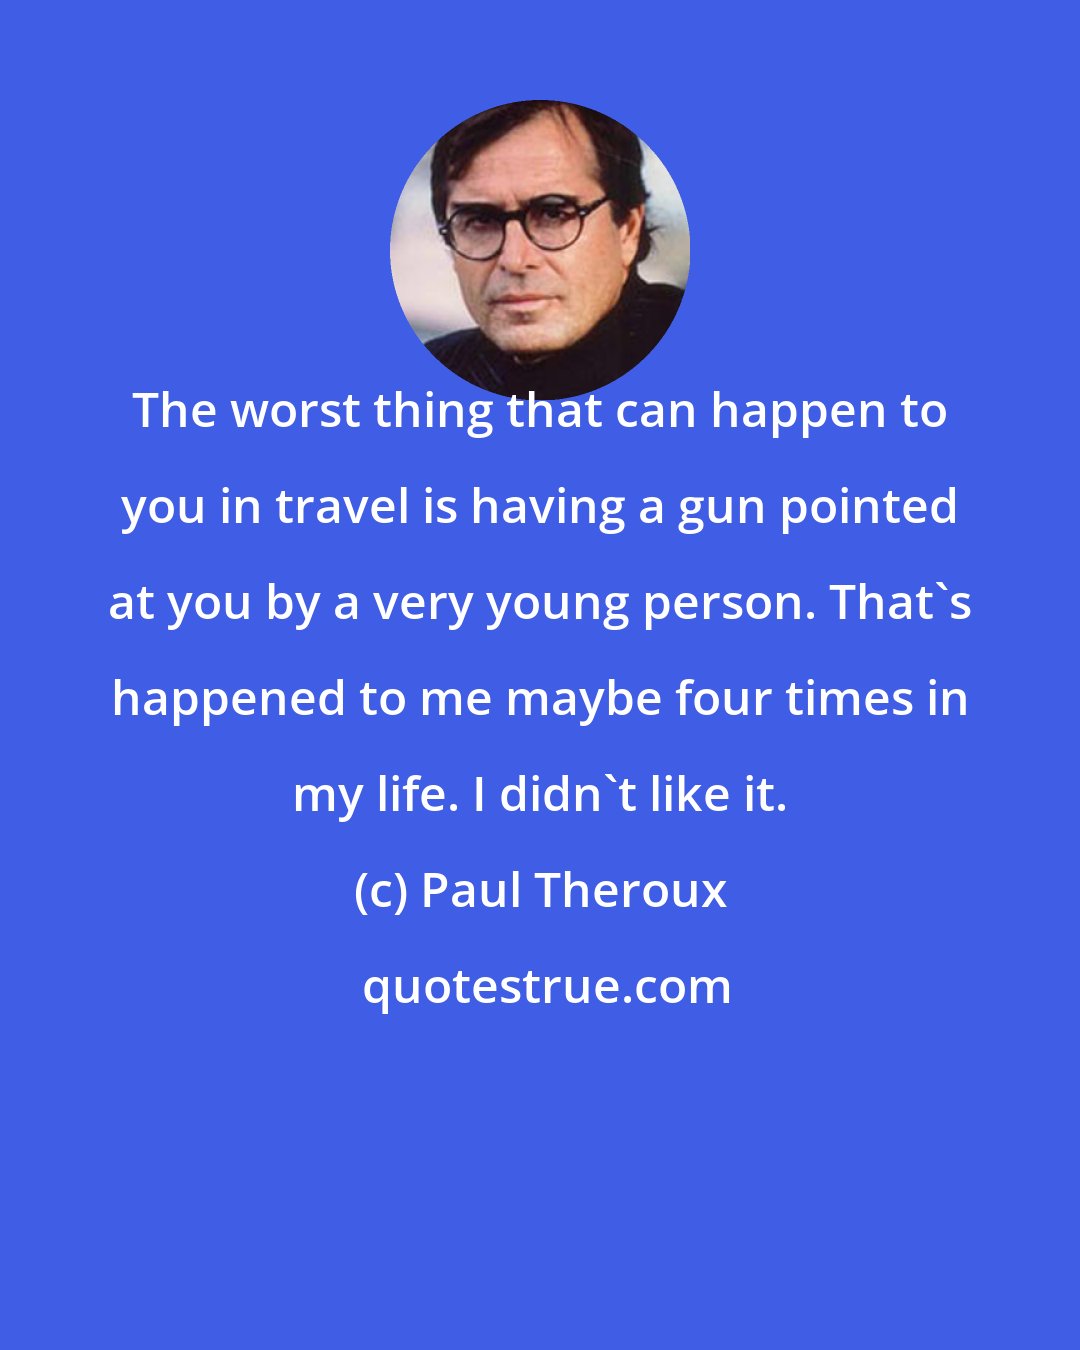 Paul Theroux: The worst thing that can happen to you in travel is having a gun pointed at you by a very young person. That's happened to me maybe four times in my life. I didn't like it.